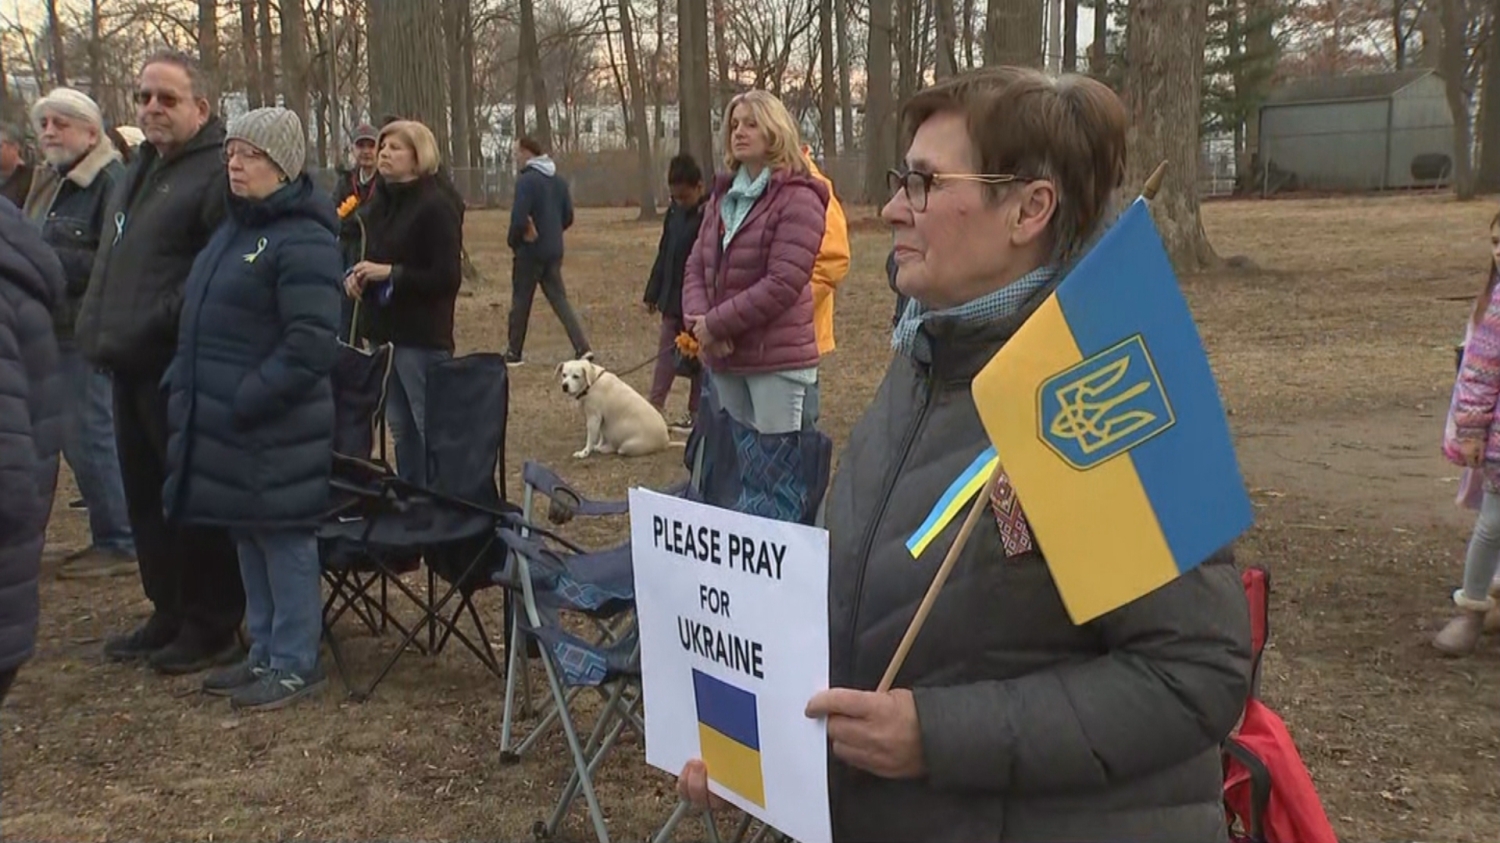 United With Ukraine Holds Peaceful Demonstration In Havertown In Solidarity With Ukrainians